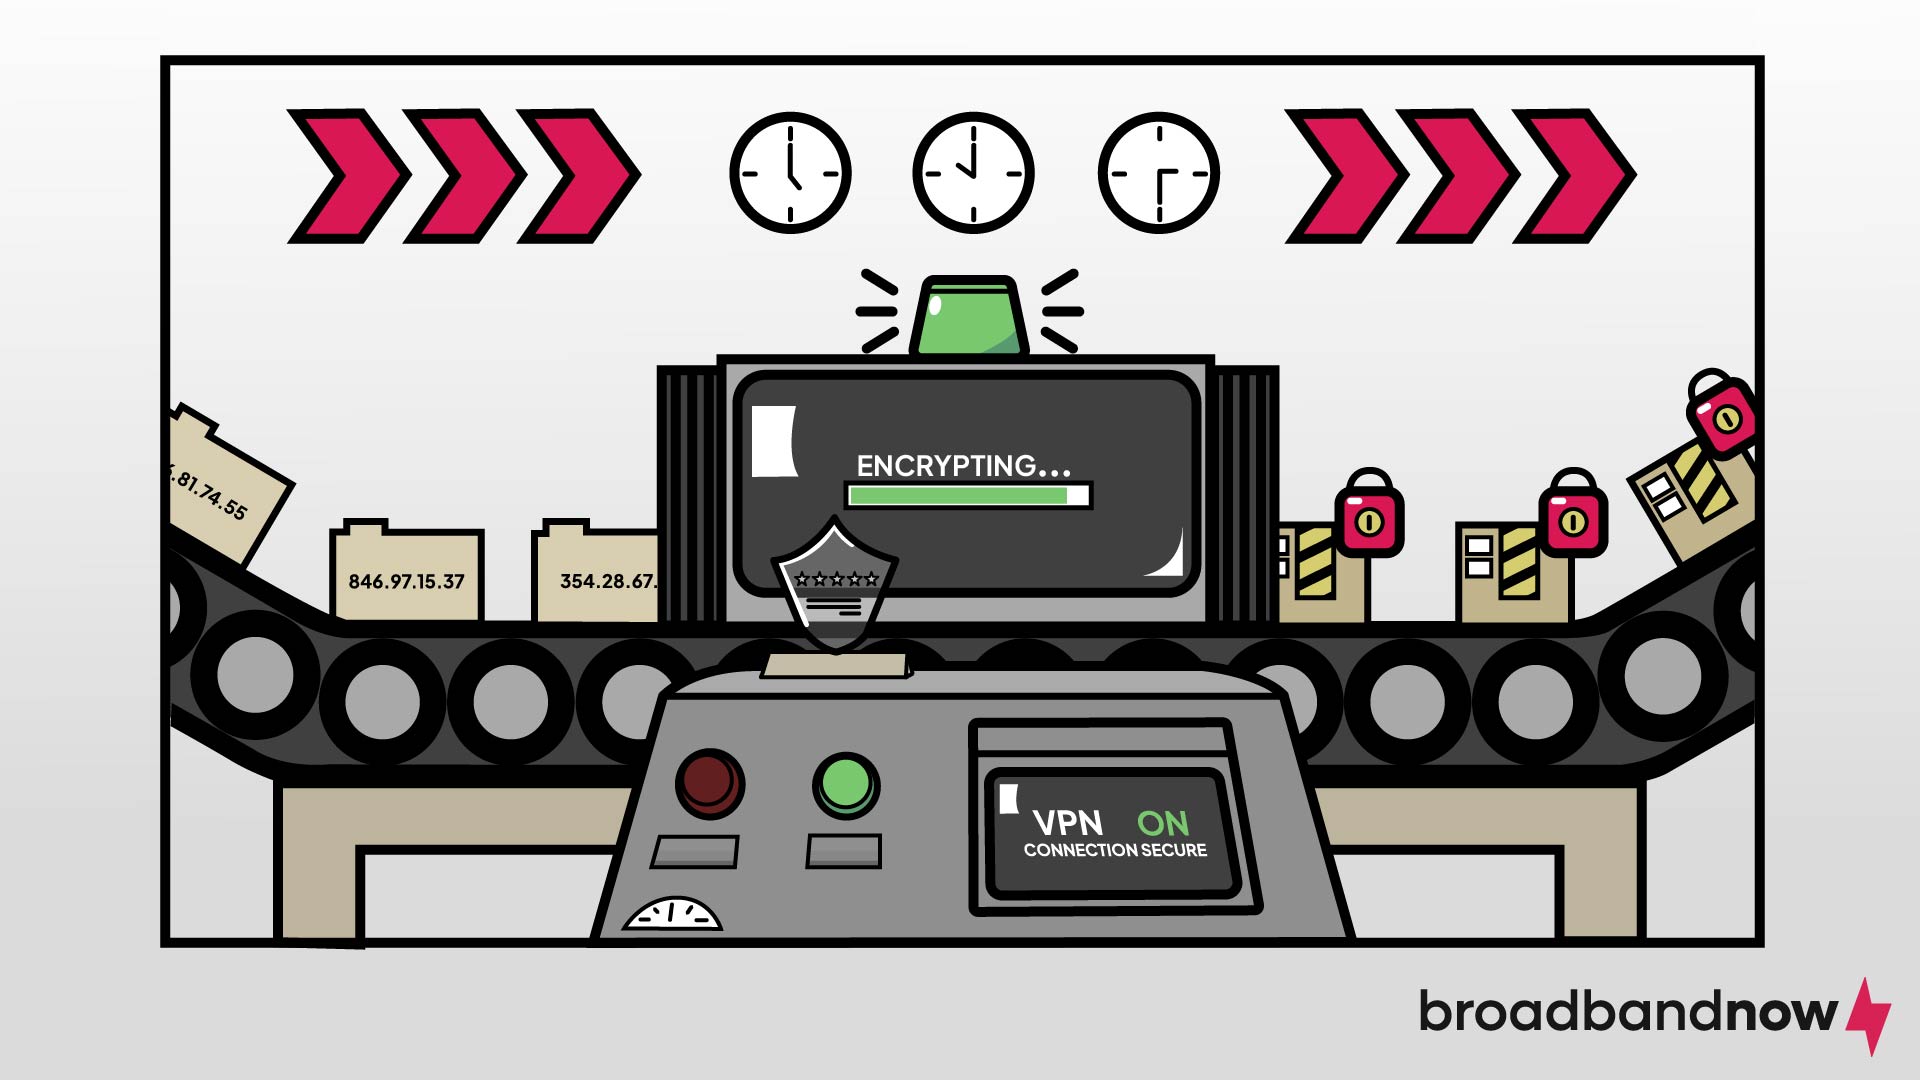 A graphic design image of files moving through a conveyor belt for encryption.